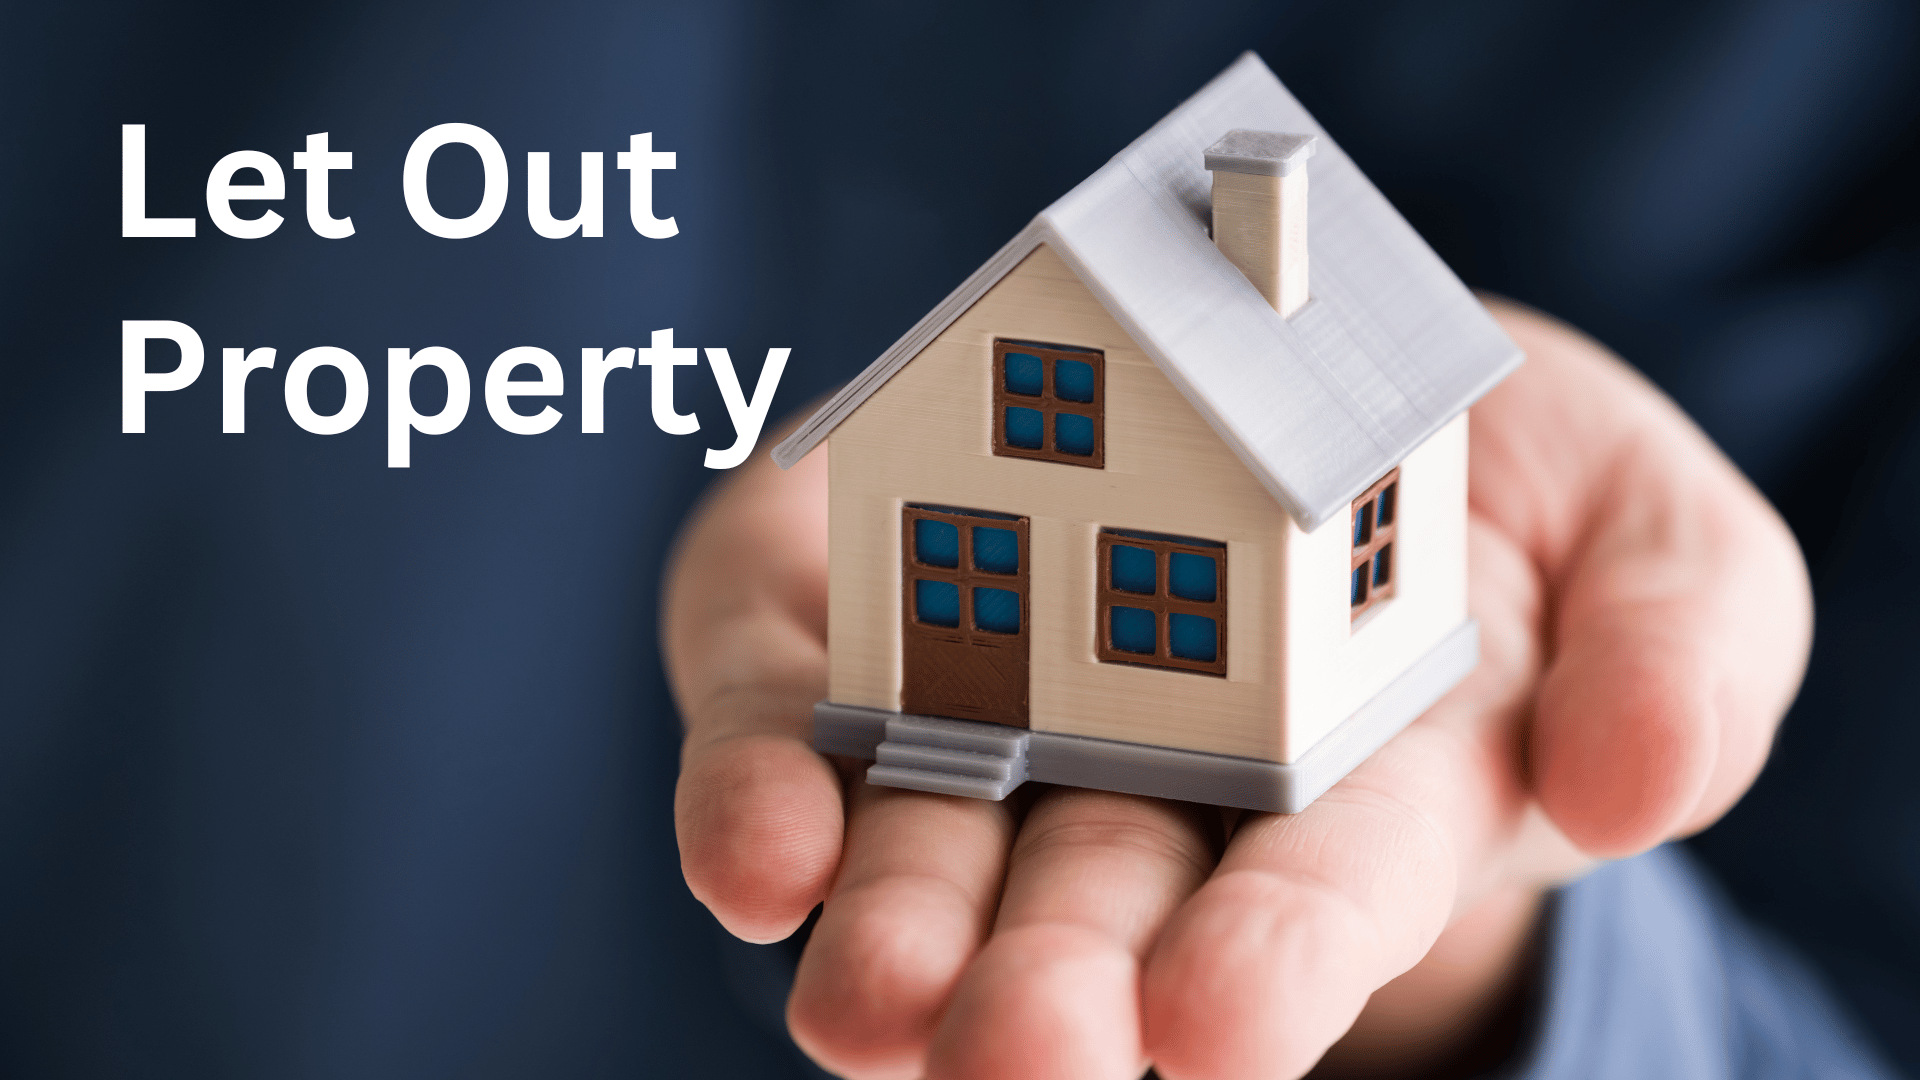 Let Out Property